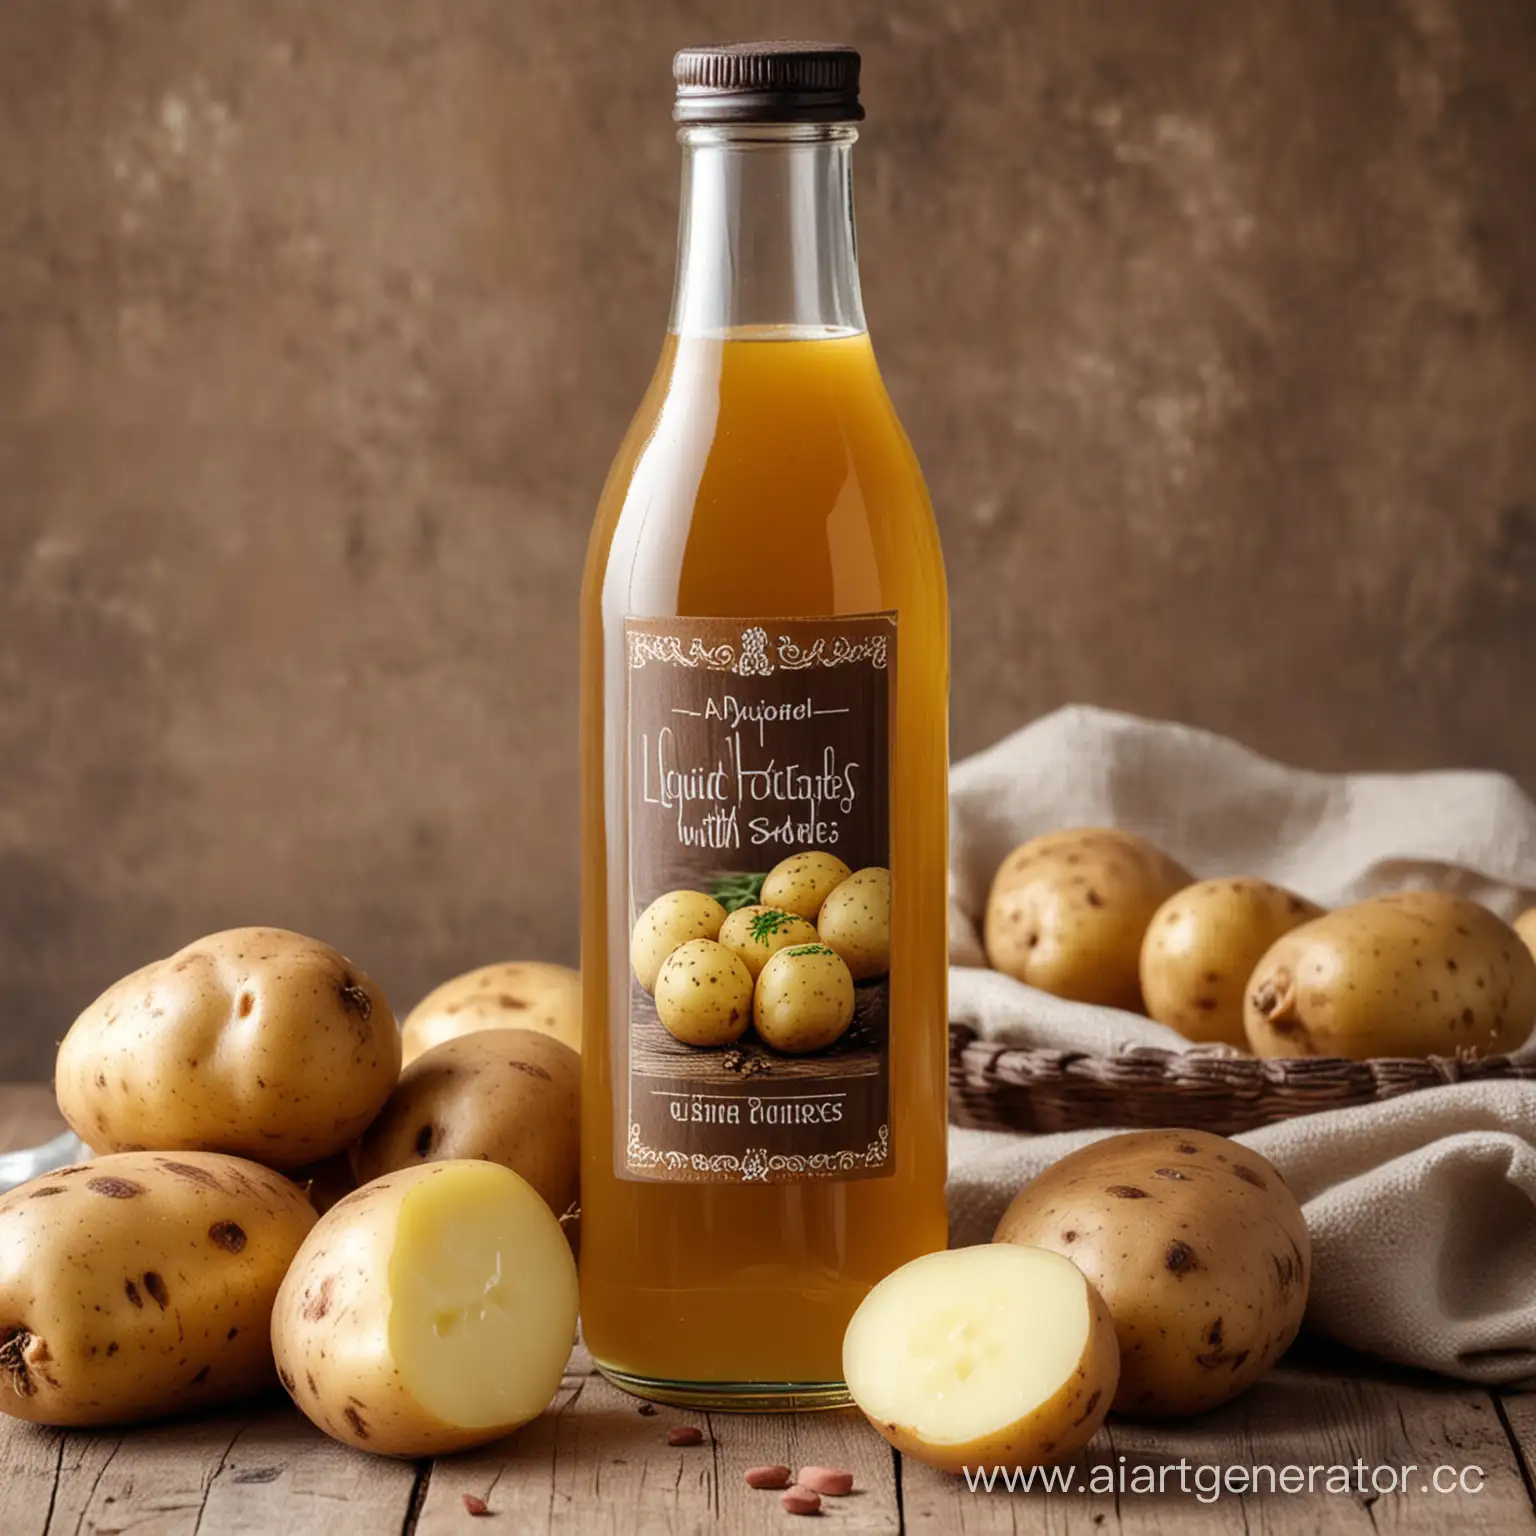 Liquid-Potatoes-Bottle-with-Potatoes-Image-and-Inscription